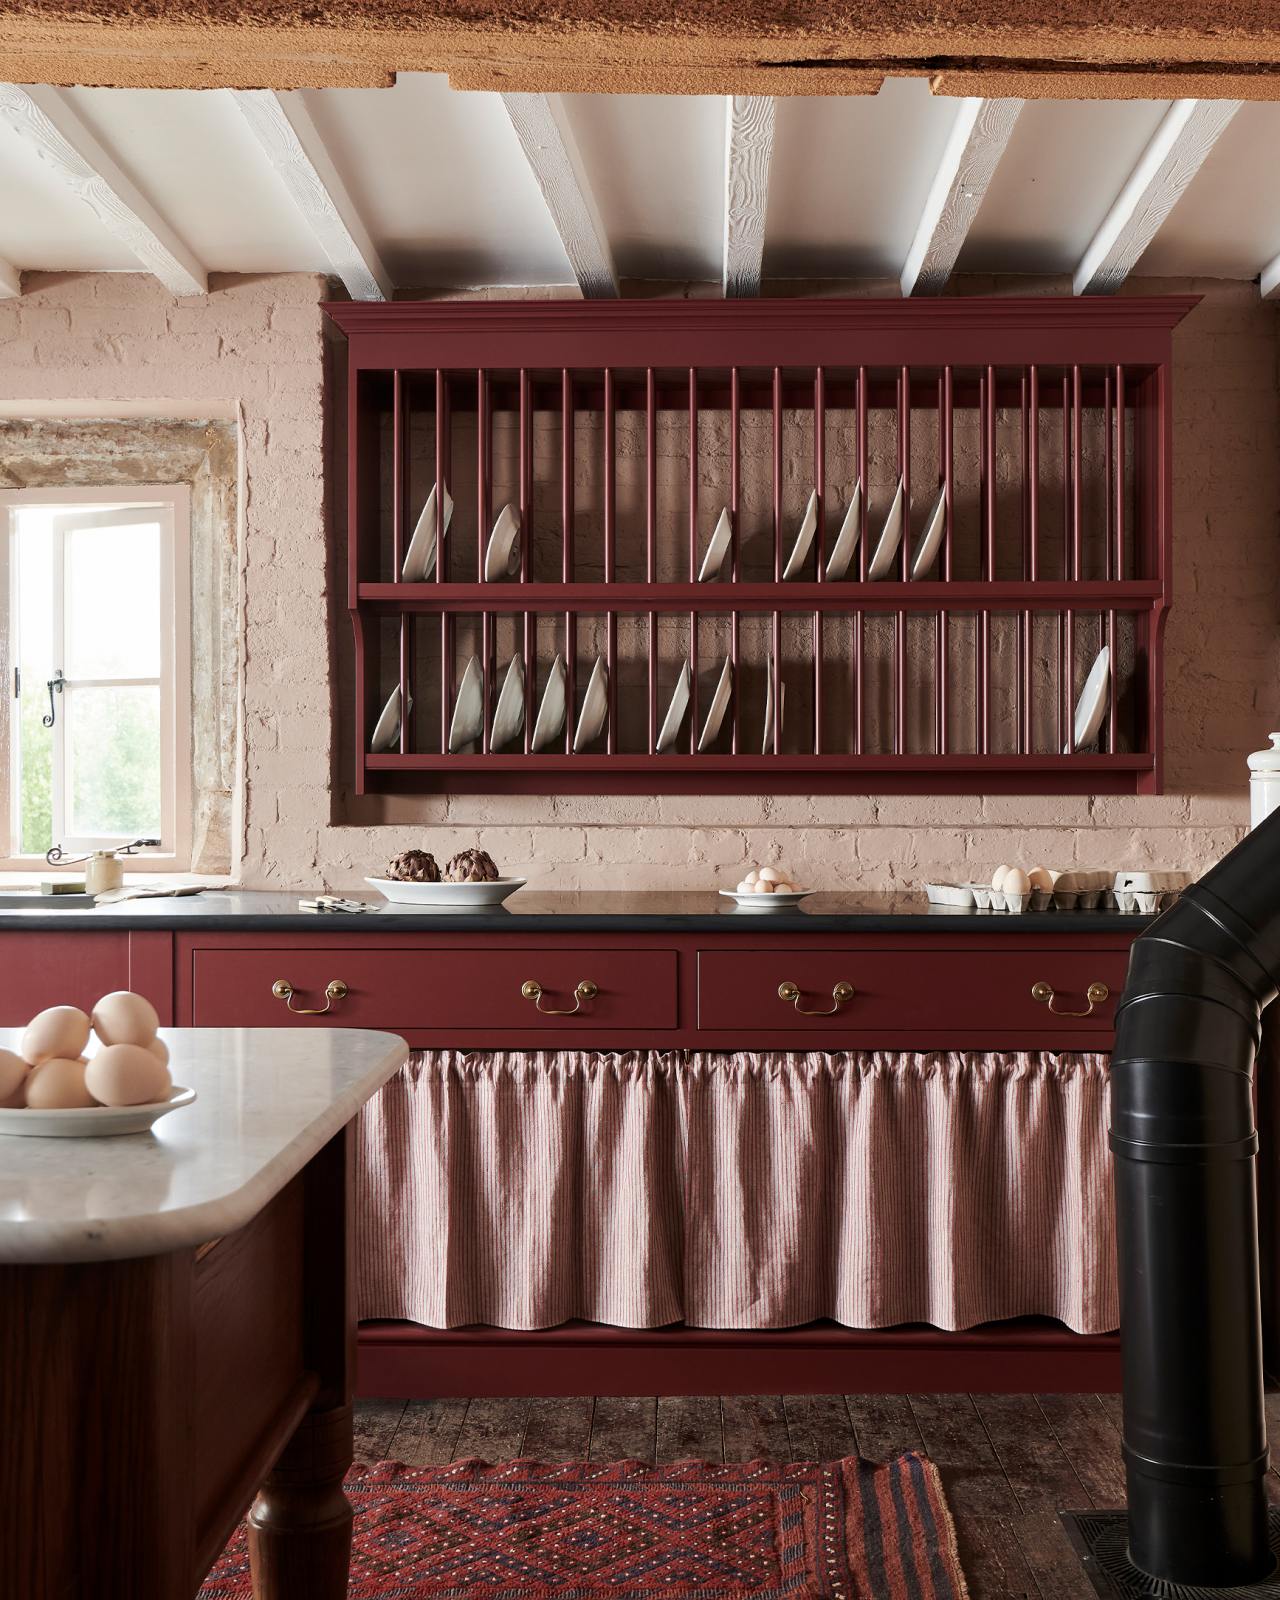 https://www.devolkitchens.co.uk/images/styles/kitchen_project_gallery_image_2x/public/Refectory%20Red%20-%2007_0.jpg?itok=l9E7xnrN